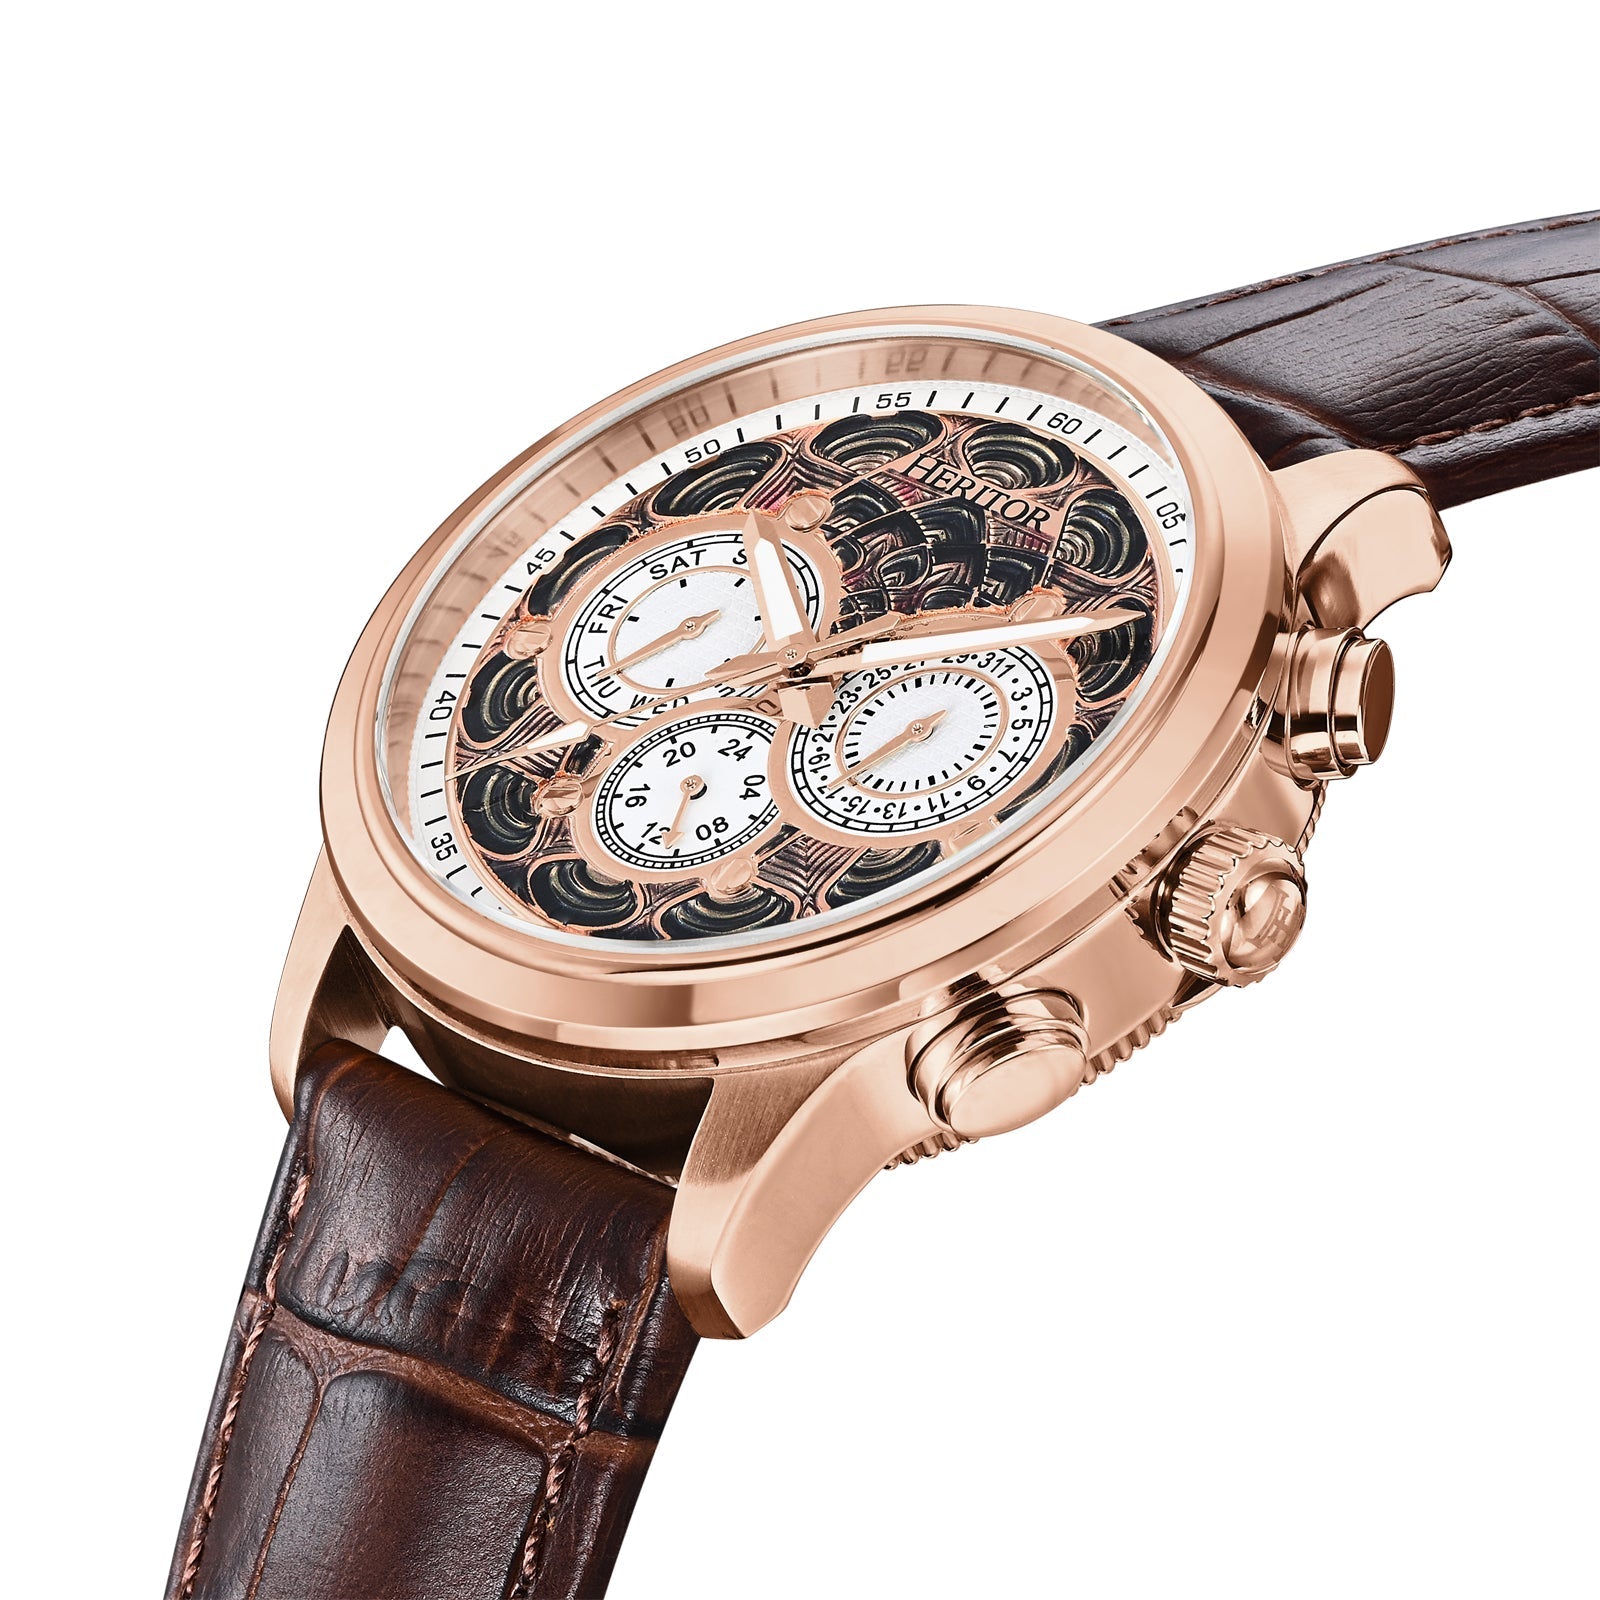 Heritor Automatic Apostle Leather Band Watch w/ Day-Date - Brown/Rose Gold - HERHS2705